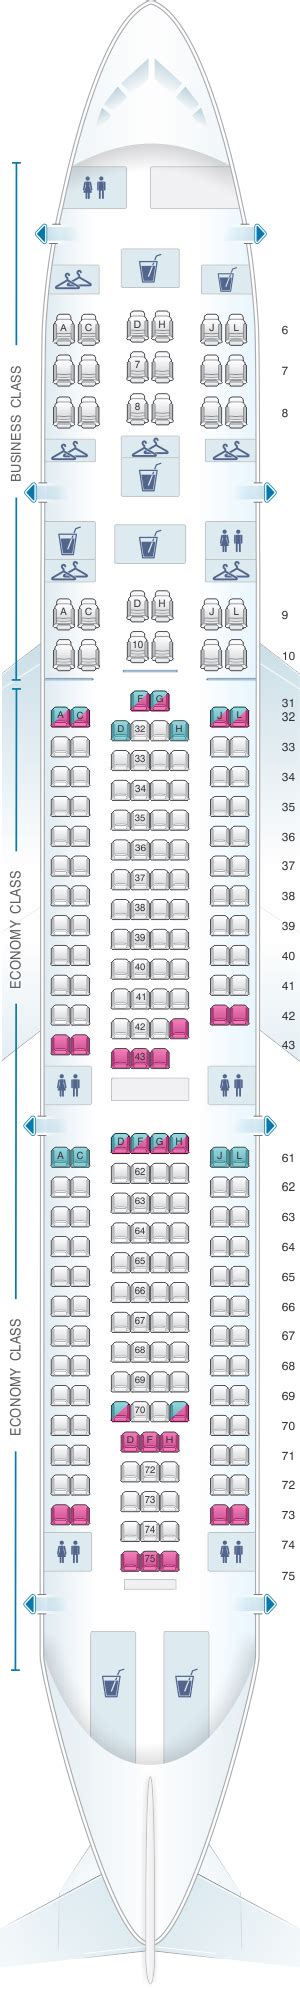 Seat Map China Eastern Airlines Airbus A330 200 232pax V1 Seatmaestro